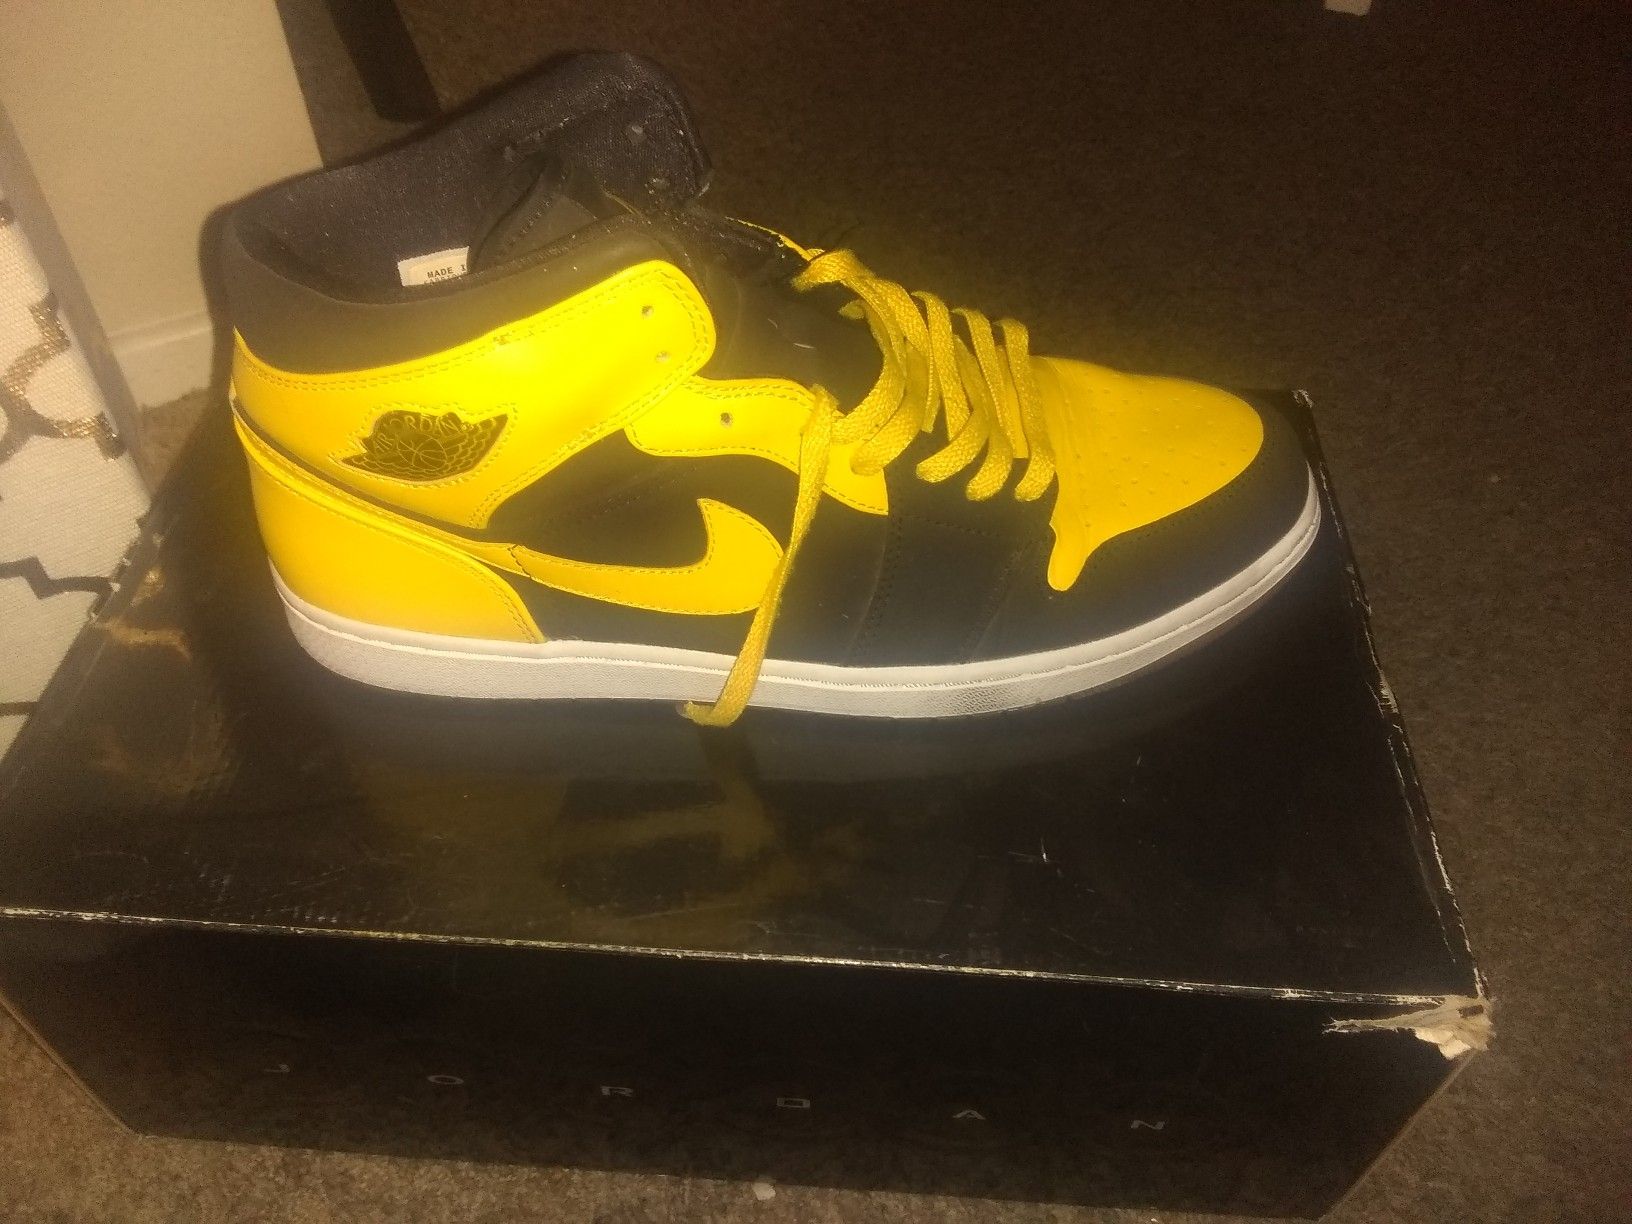 Jordan BLK and yellow 1's from the first time he release them shoes